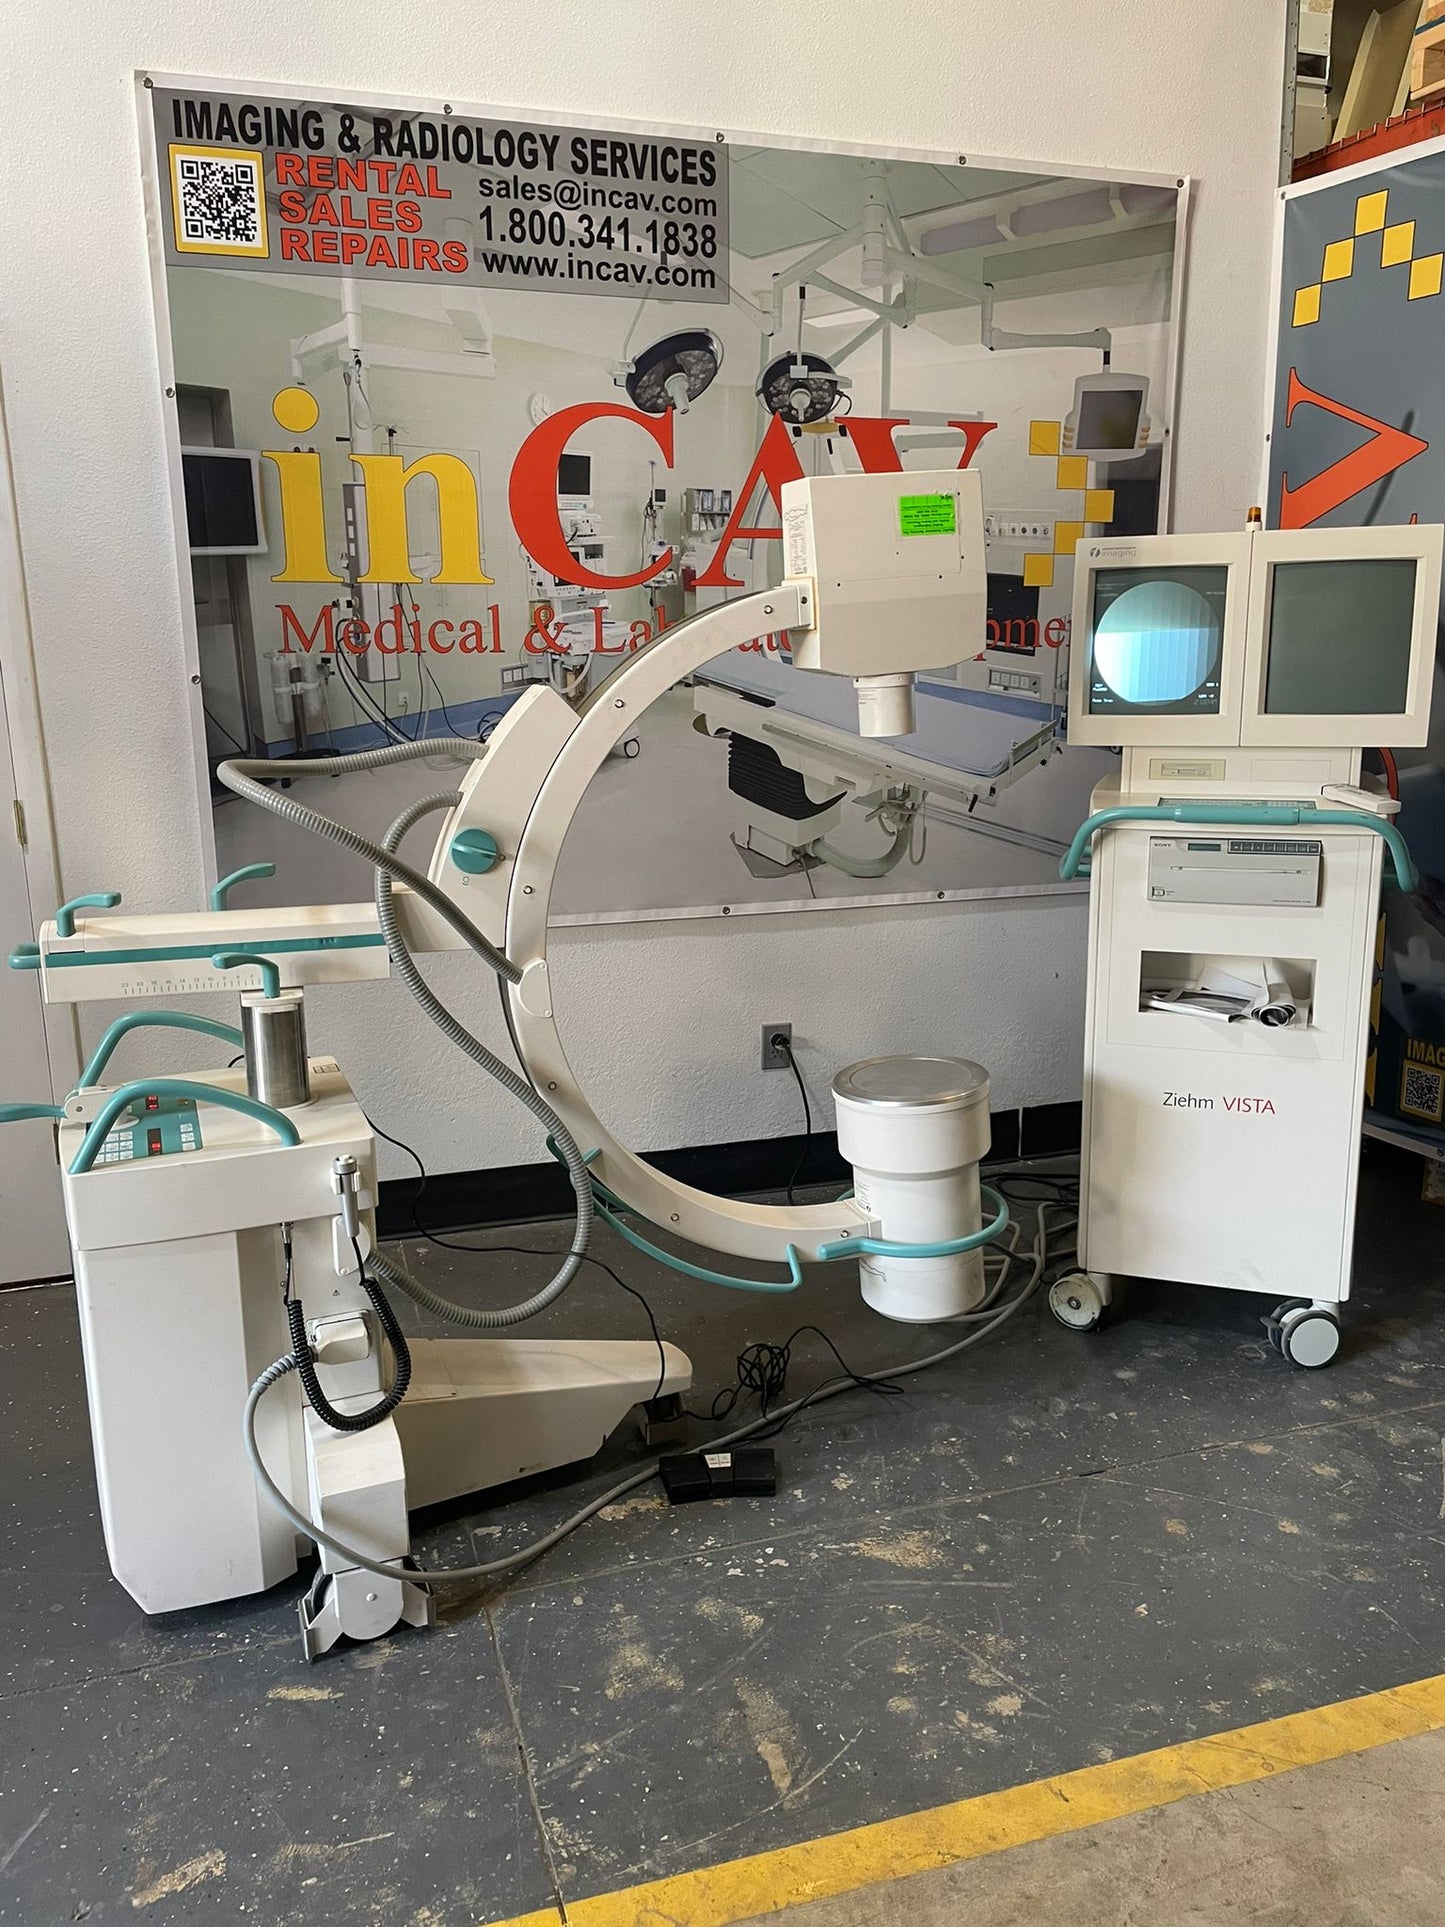 ZIEHM Vista C-arm with double monitor screen